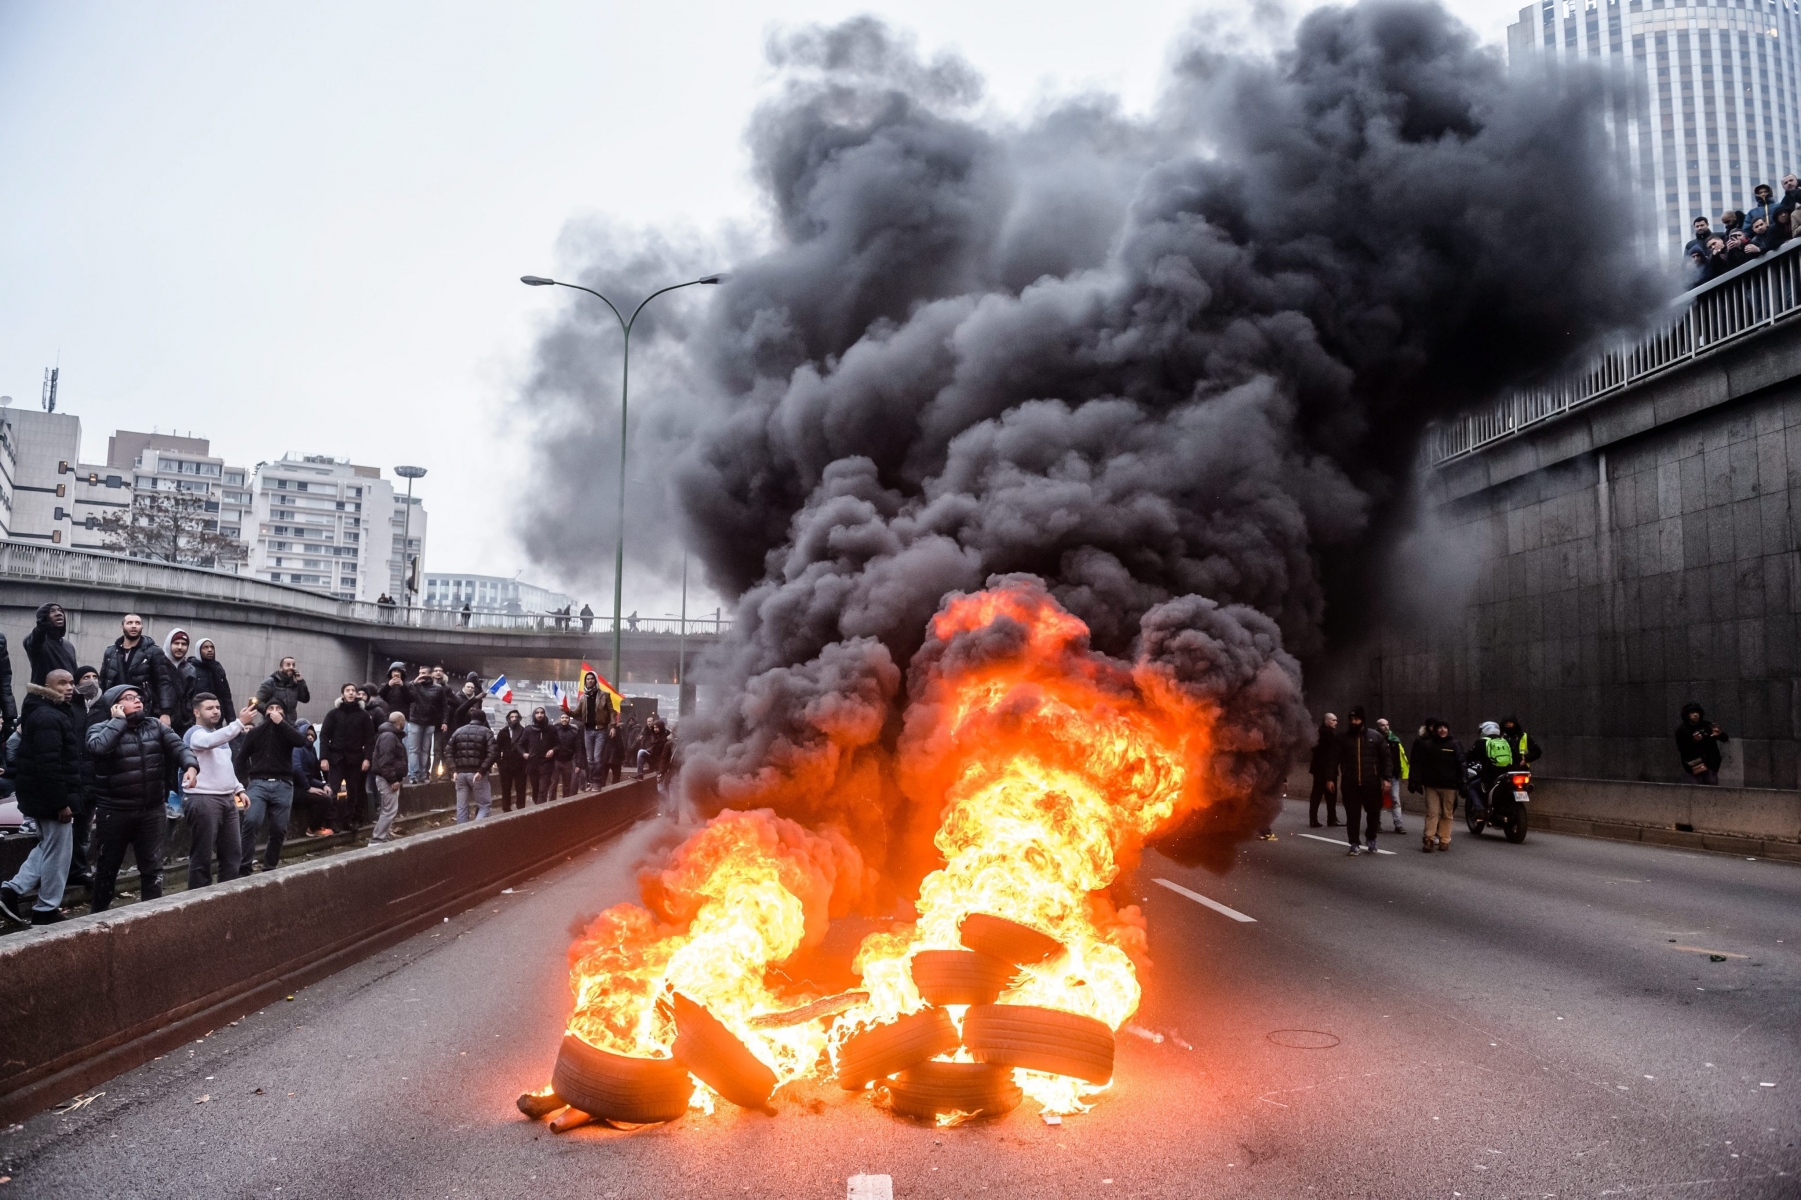 epa05126560 French and european taxi drivers clash with riot police as they attempt to disrupt rush hour traffic on the ring-road around Paris, during a demonstration against the app-based transportation network and taxi company Uber's service in Paris, France, 26 January 2016. The protest caused traffic disruption in Paris and its region. Despite a law making Uber service illegal, the US-based company continues to develop in French cities, provoking reactions of taxi drivers.  EPA/CHRISTOPHE PETIT TESSON FRANCE TAXI UBER PROTEST